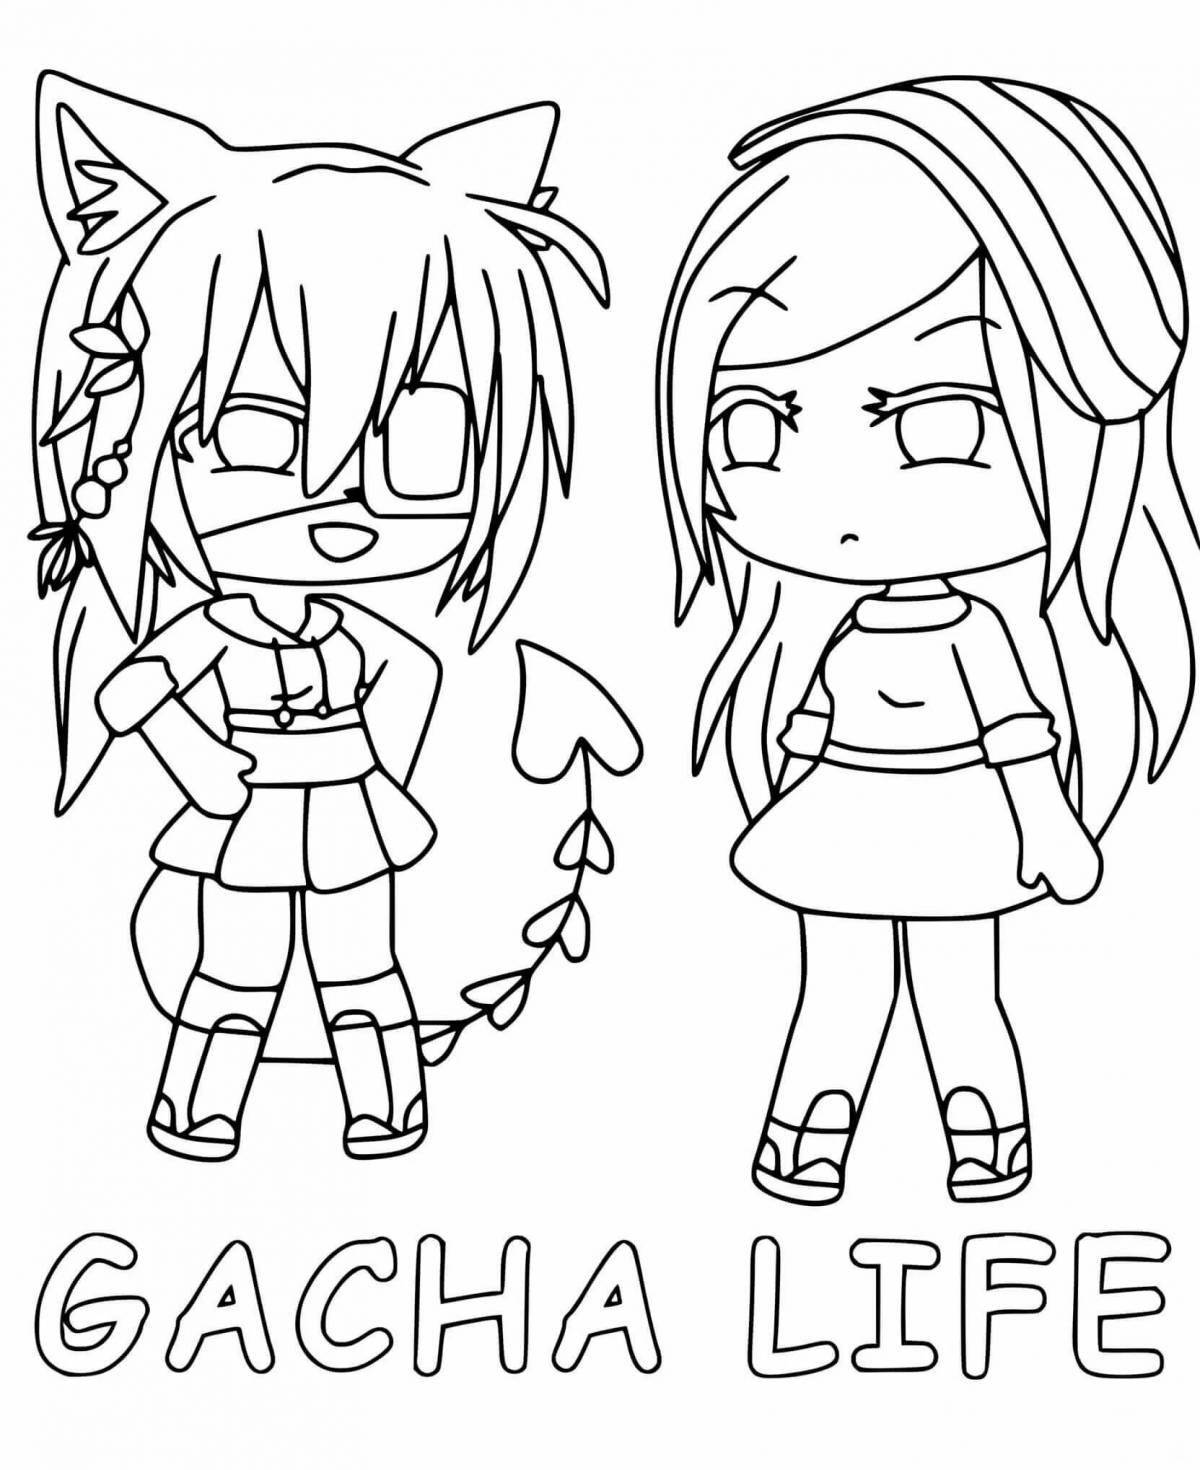 Colorful gacha club body coloring page